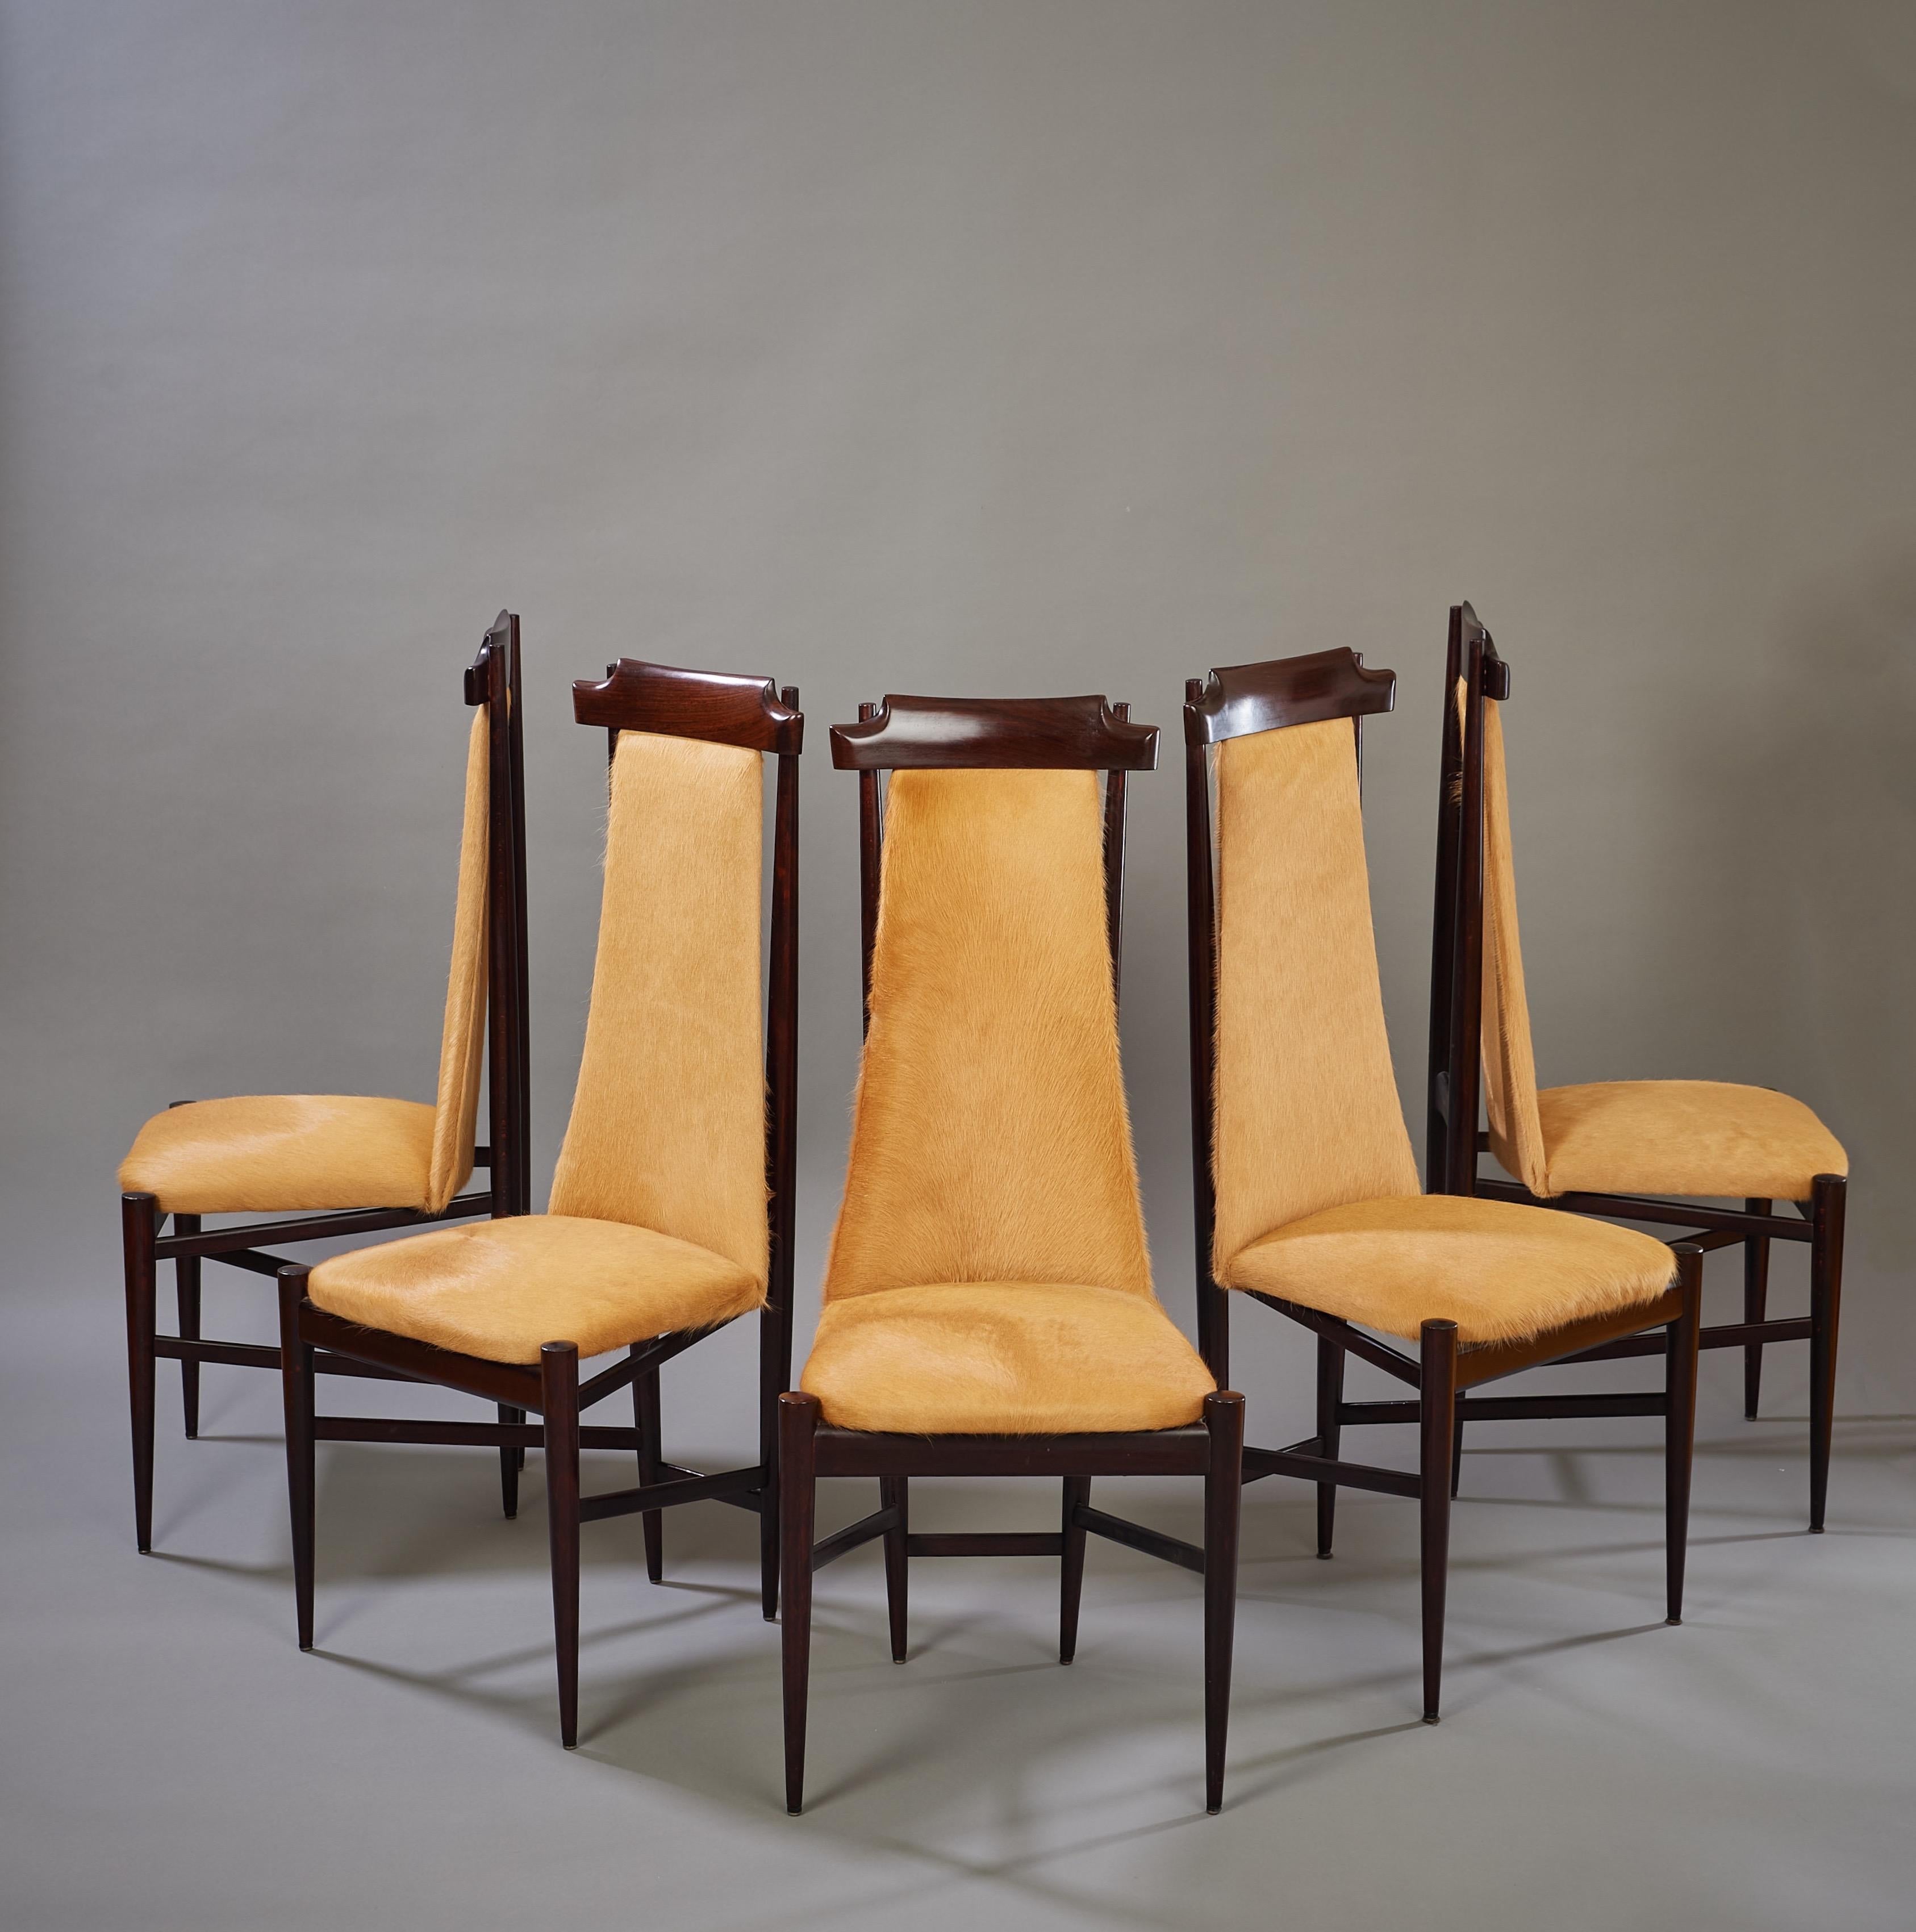 Mid-20th Century Sergio Rodrigues Six Dining Chairs in Wood and Tan Cowhide, Brazil, 1960s For Sale